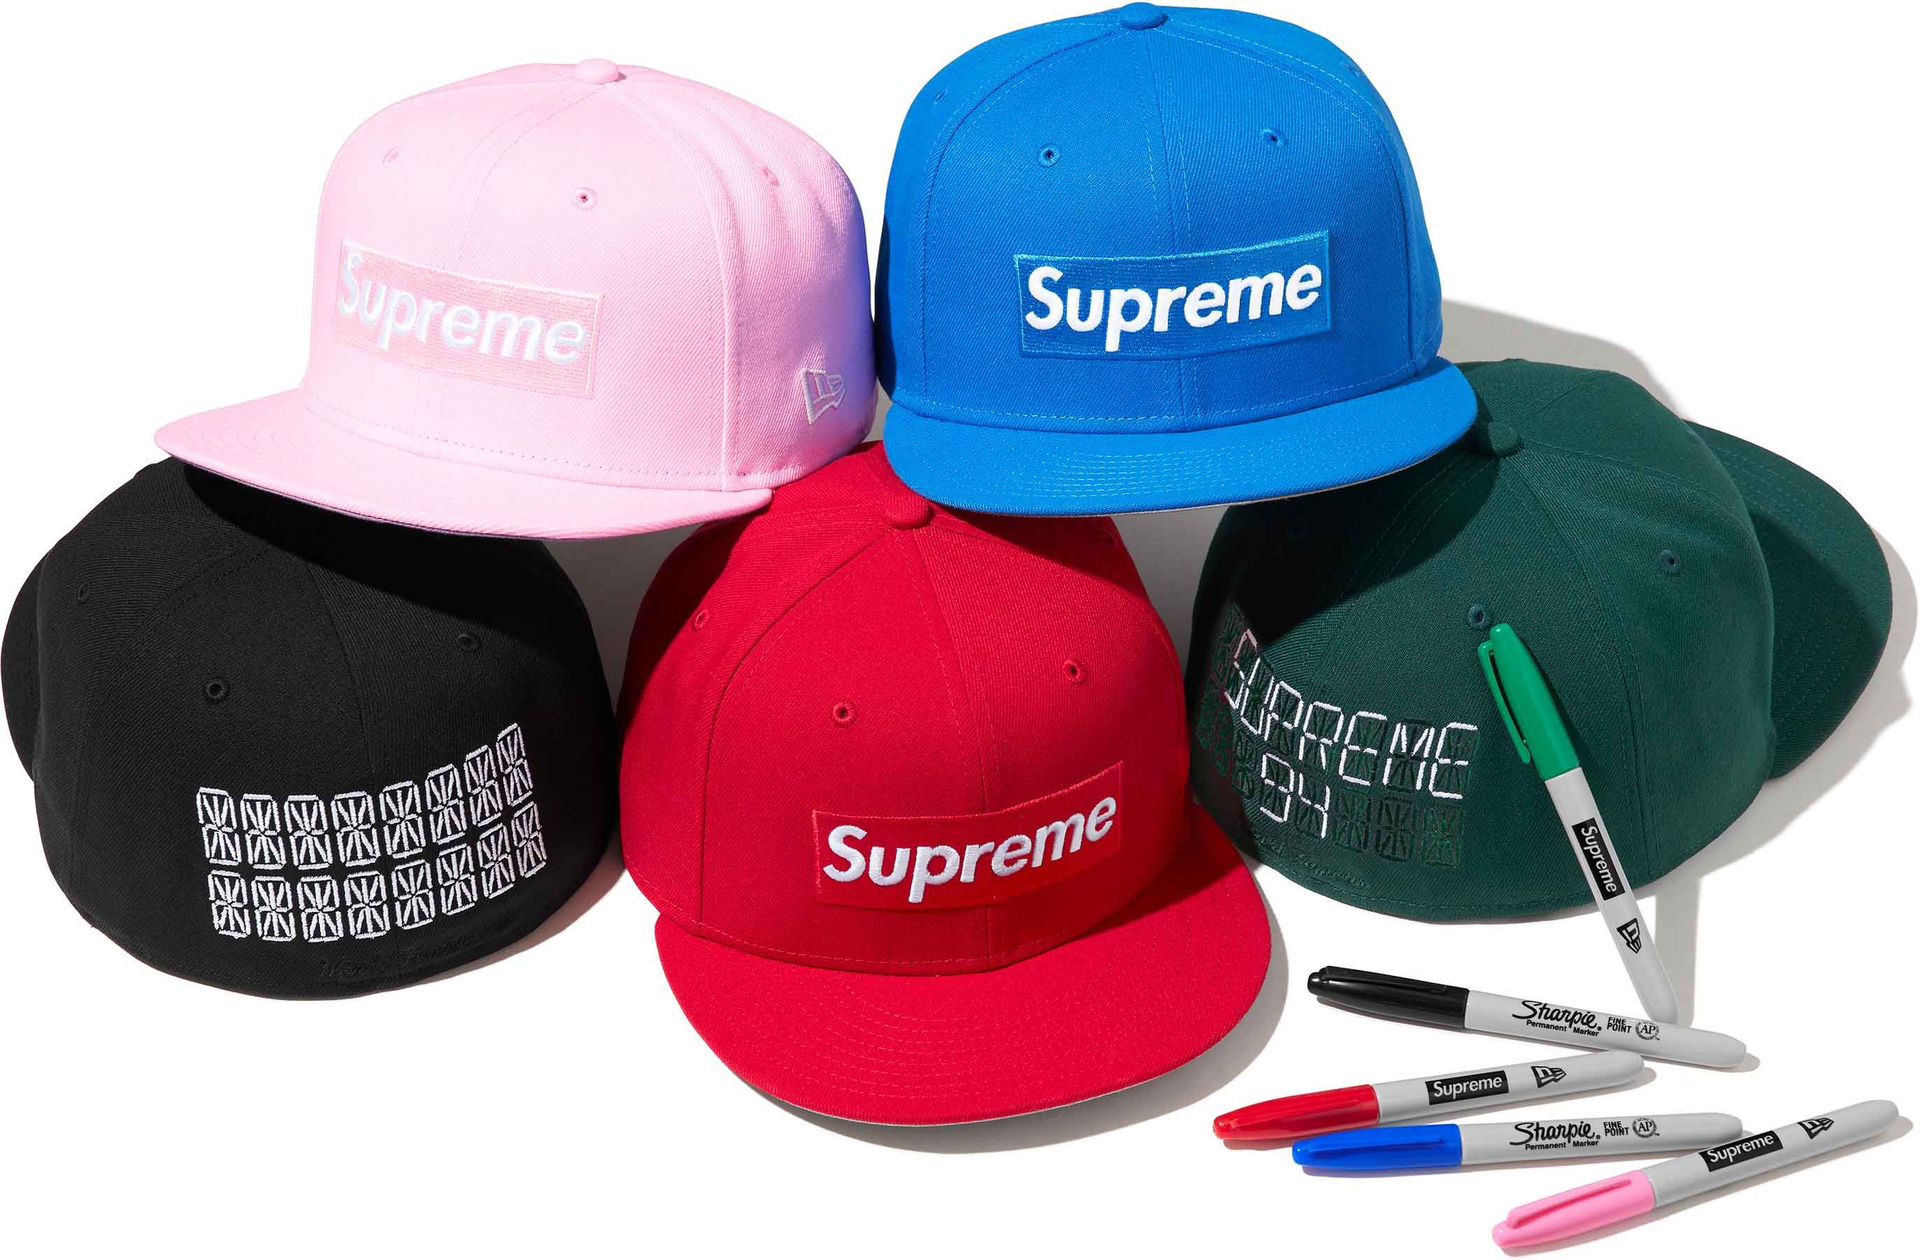 Supreme Fitteds 7 1/8 Sharpie Pack & Beanies 